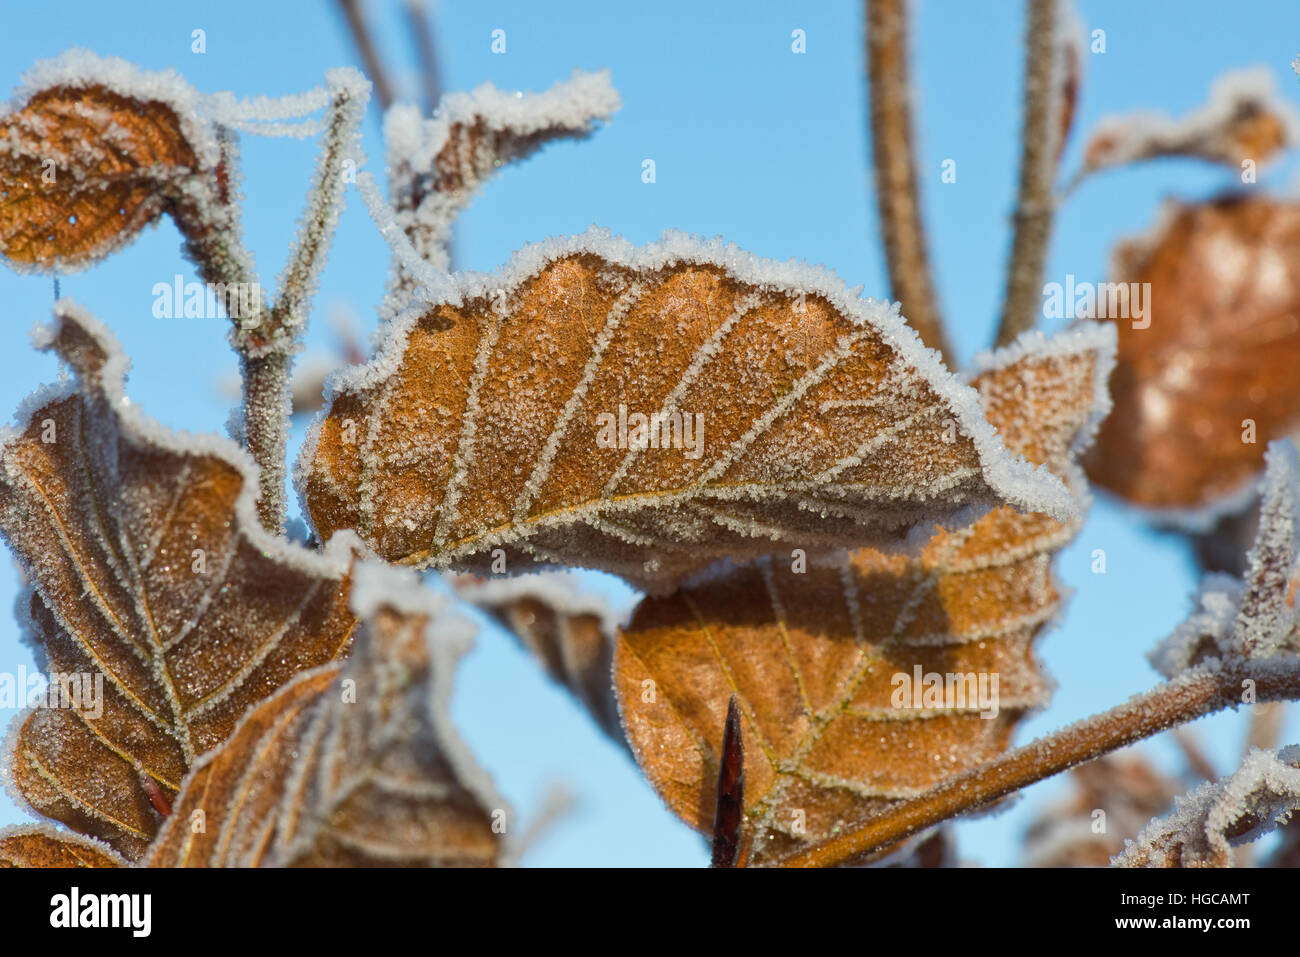 Hard frost on golden brown beech leaves against a blue sky on a cold winter morning in December Stock Photo